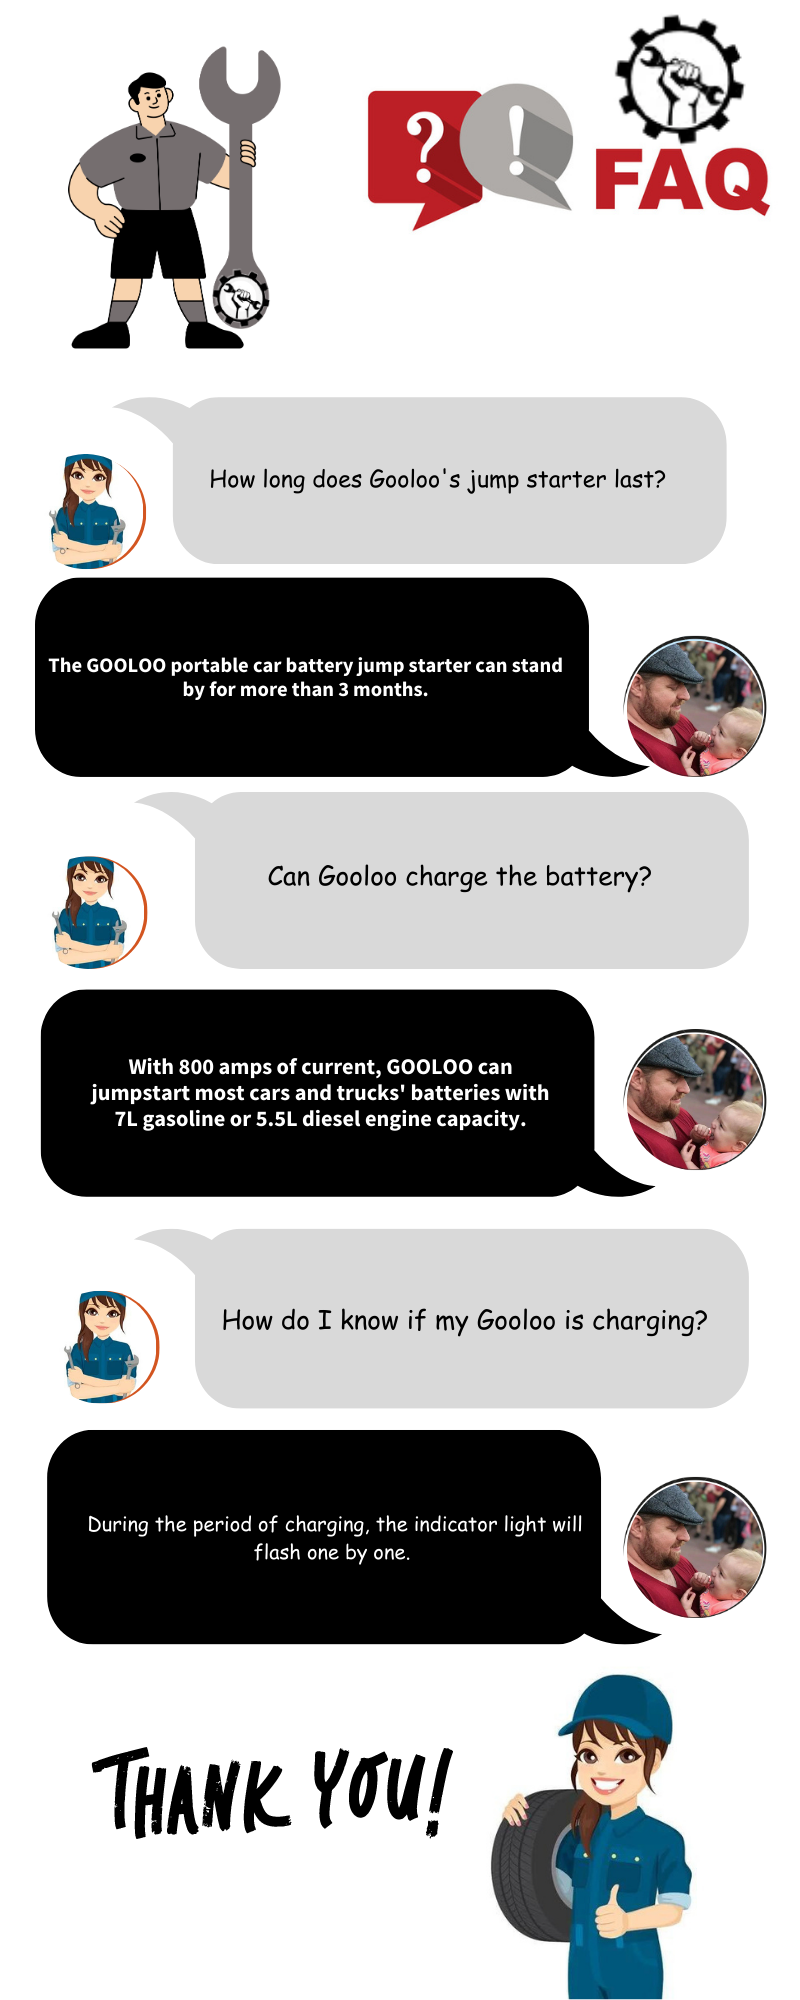 faq gooloo jump staters Fix To All Common Gooloo Jump Starters Problems